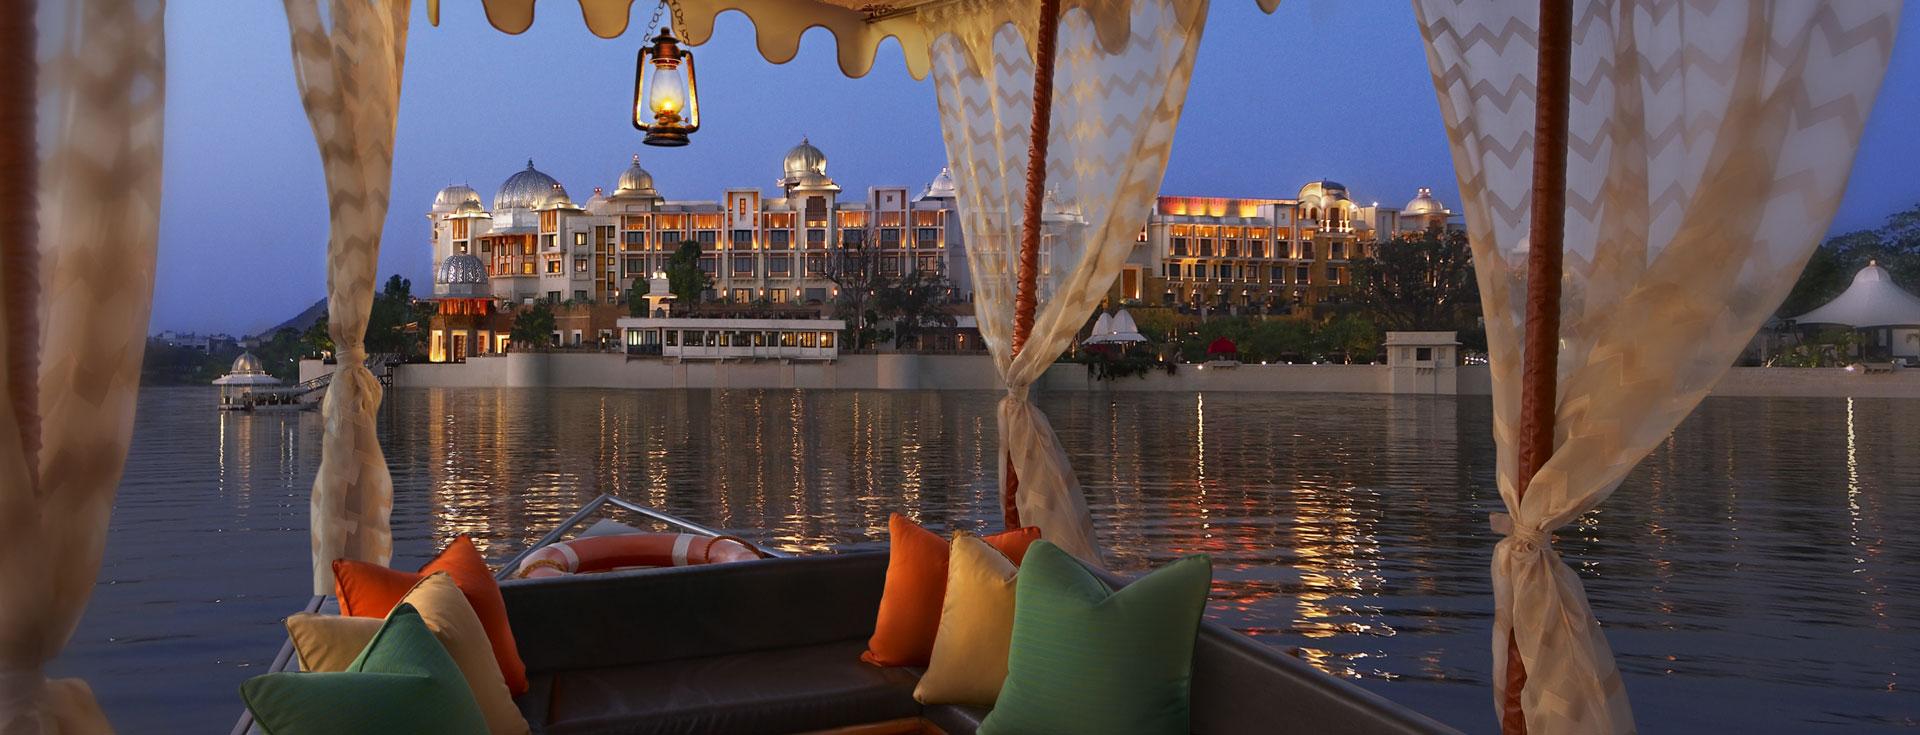 The Perfect Place for Your Royal Destination Wedding: The Leela Palace Udaipur